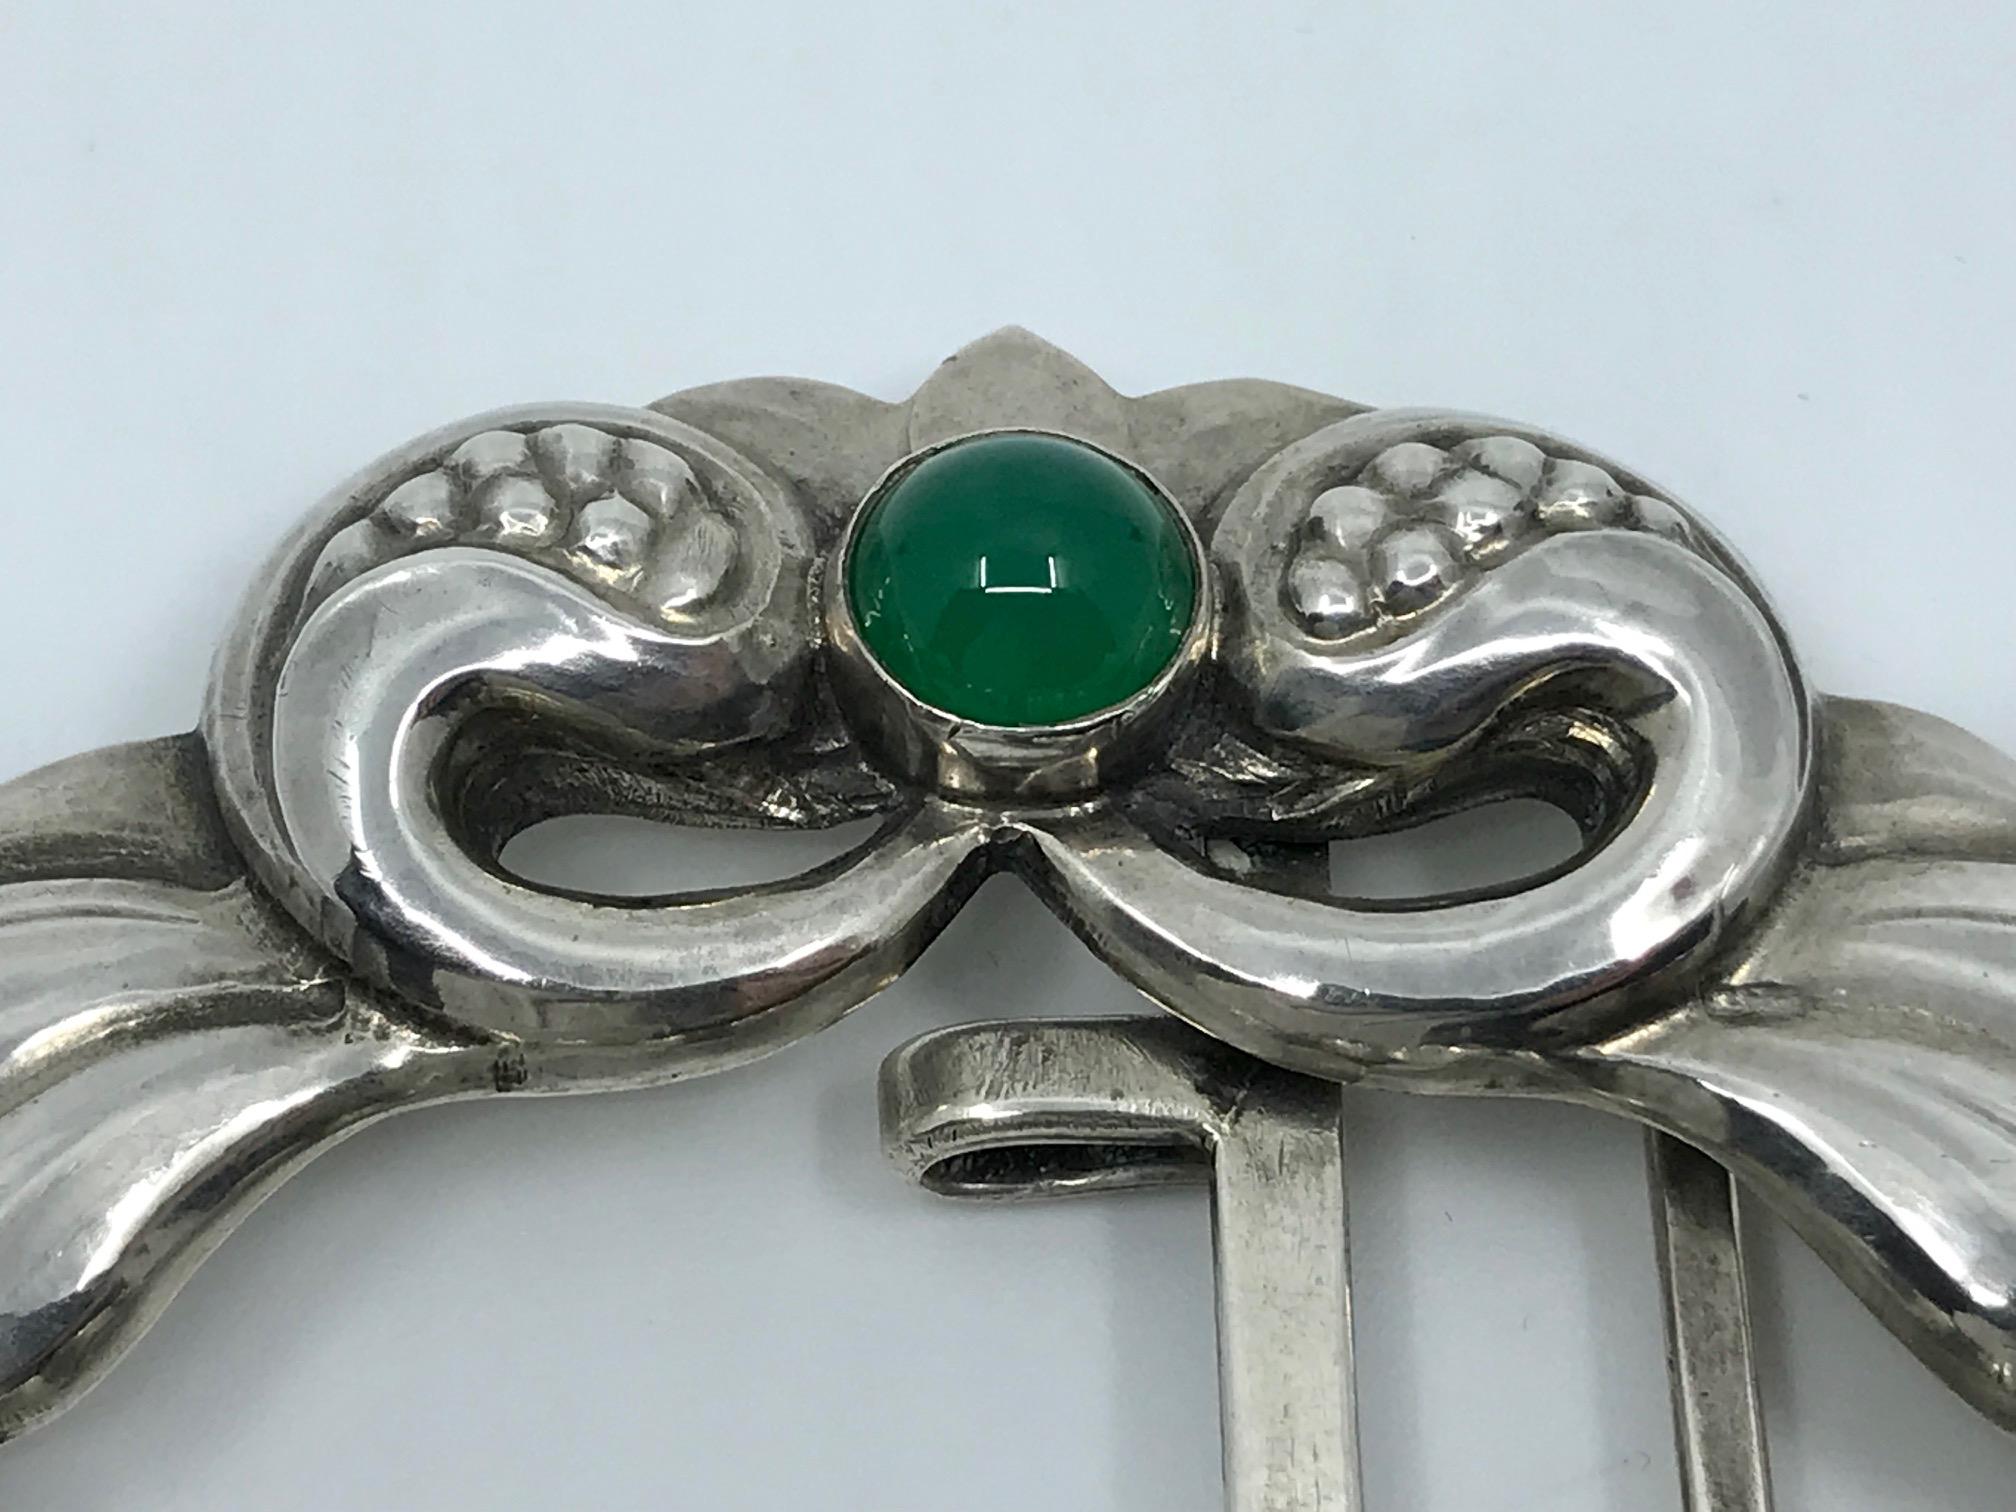 Rare antique 828 silver Georg Jensen belt buckle with cabochon set amber and green agate stones, design #28 by Georg Jensen.
Measures 3½” x 2½” (8.8cm x 6.2cm).
Antique Georg Jensen hallmarks from 1908-1914, 828s.